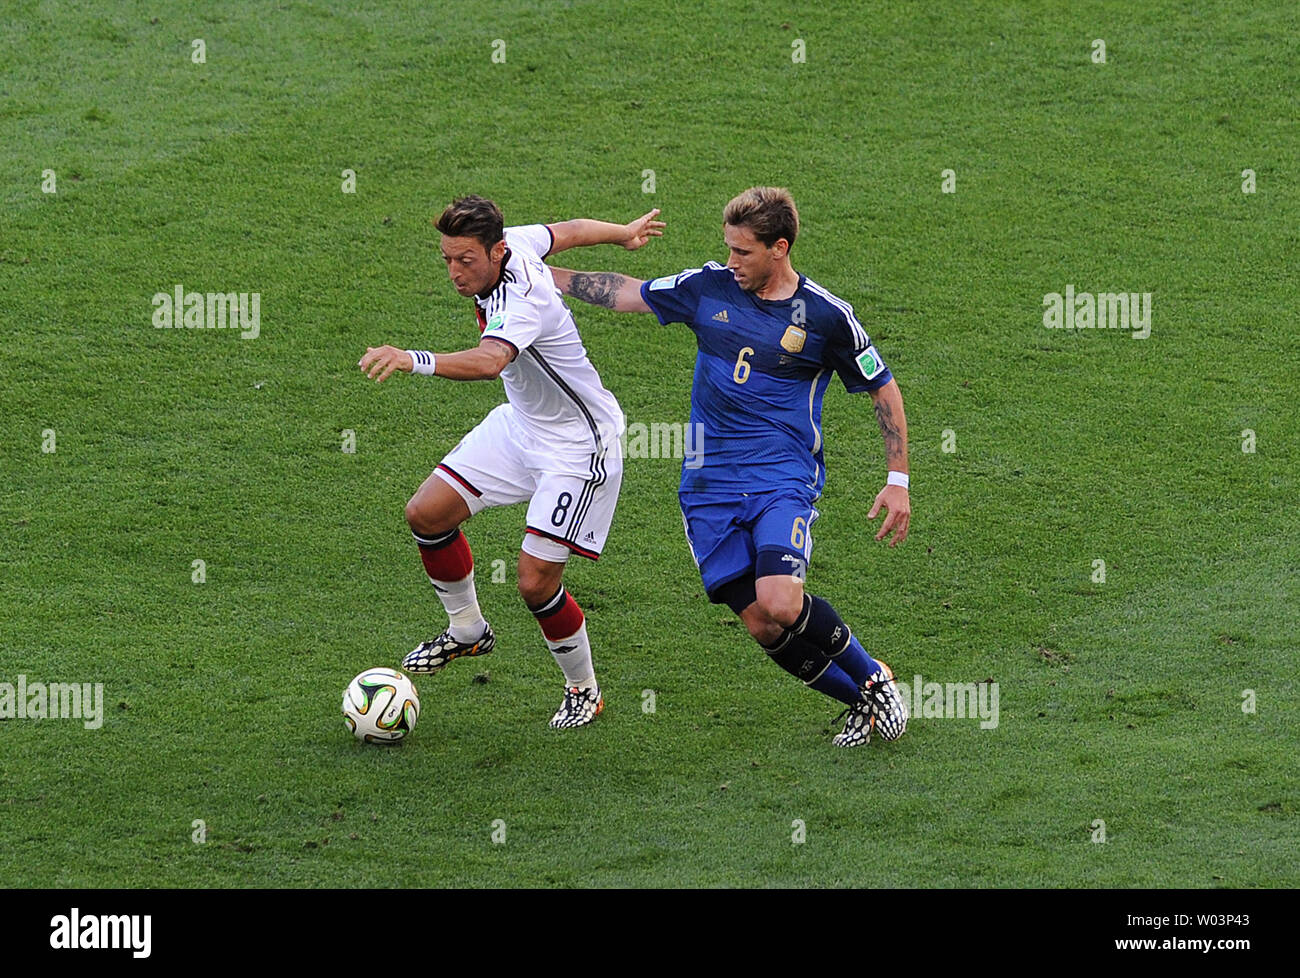 Mesut Ozil (L) of Germany competes with Lucas Biglia of Argentina during the 2014 FIFA World Cup Final at the Estadio do Maracana in Rio de Janeiro, Brazil on July 13, 2014. UPI/Chris Brunskill Stock Photo